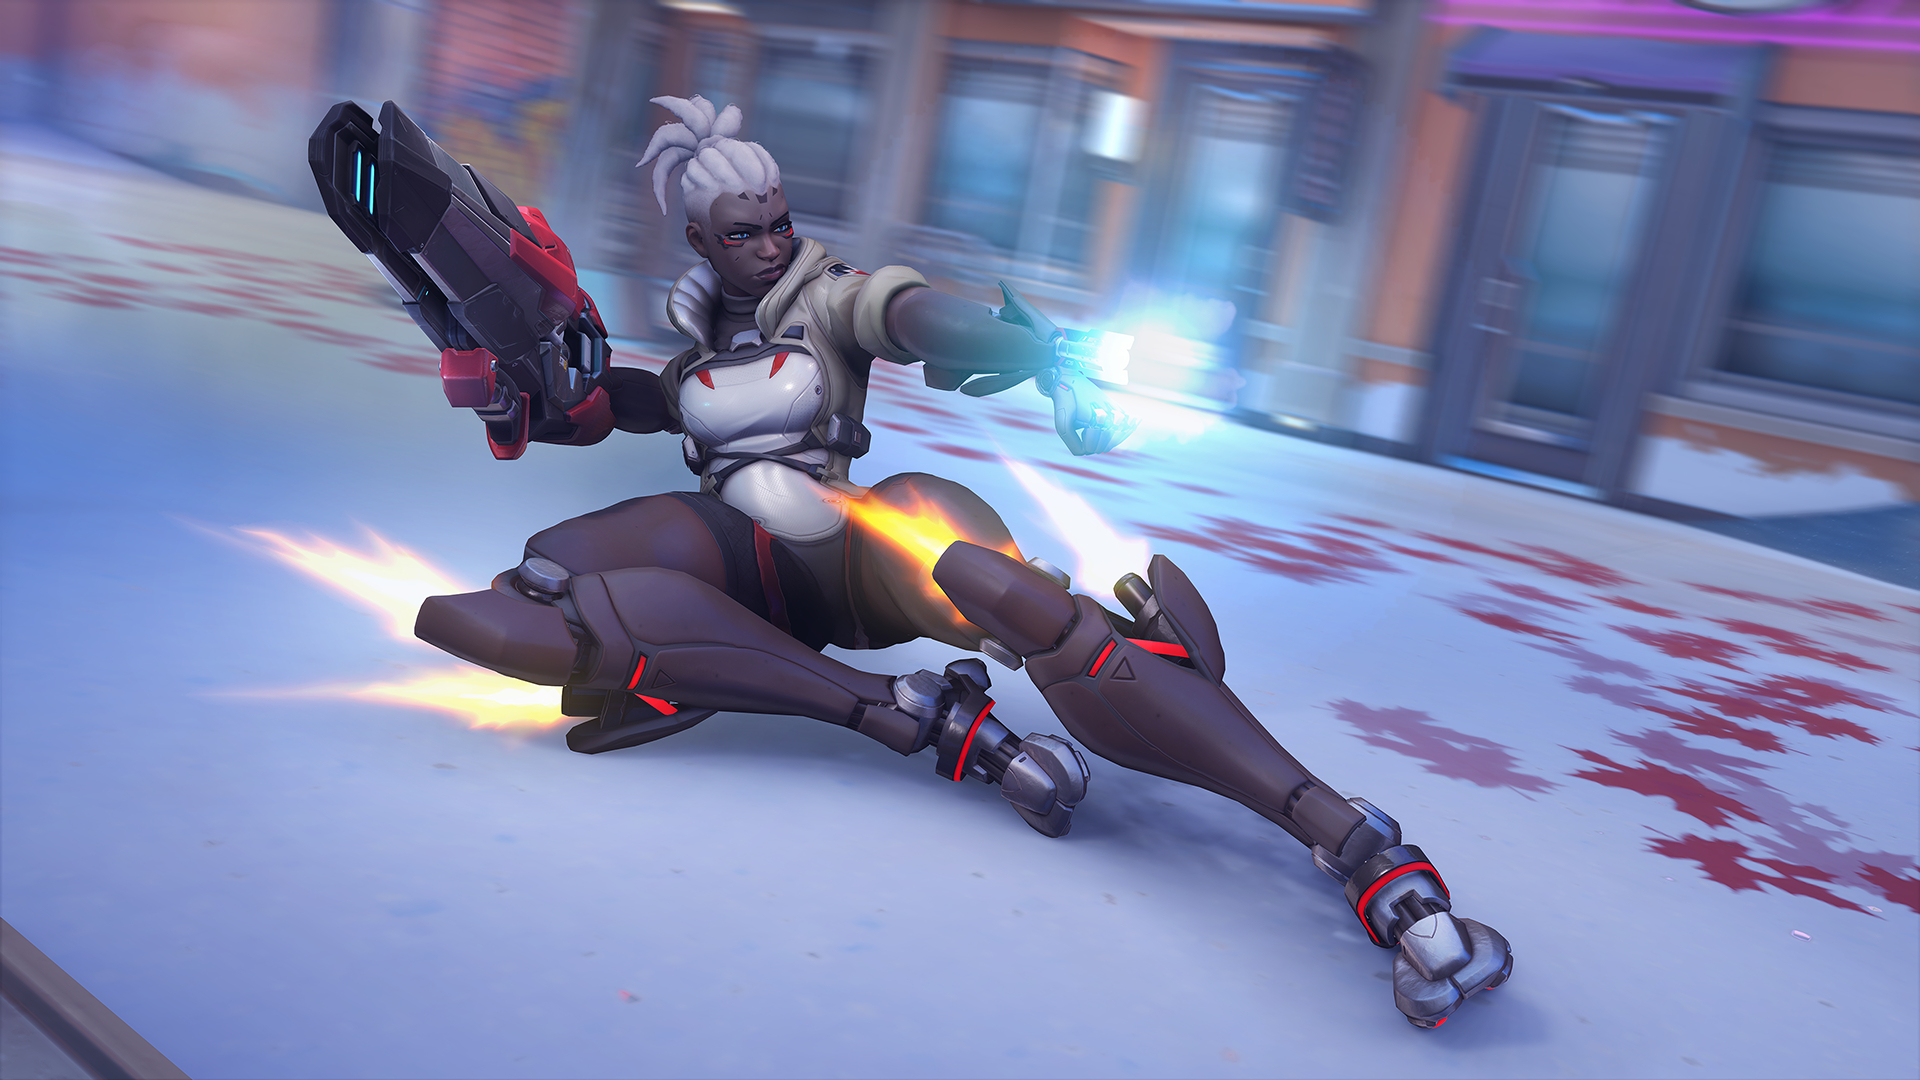 Sojourn, a cyborg women with a big gun, slides on the ground in Overwatch 2